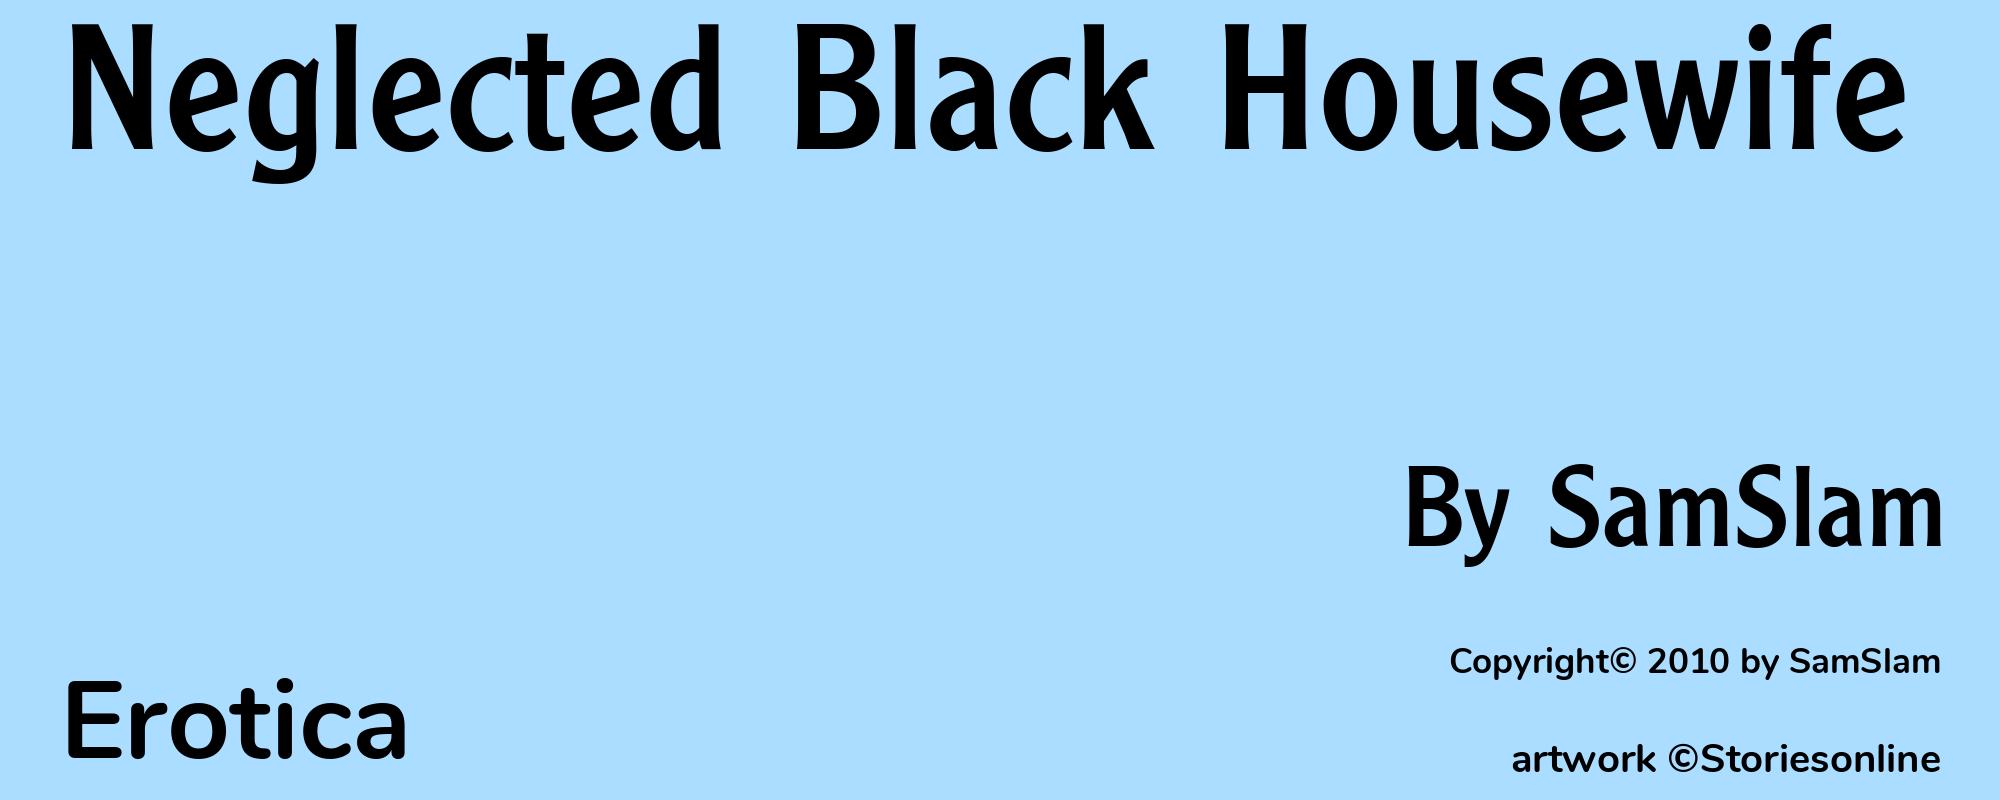 Neglected Black Housewife - Cover